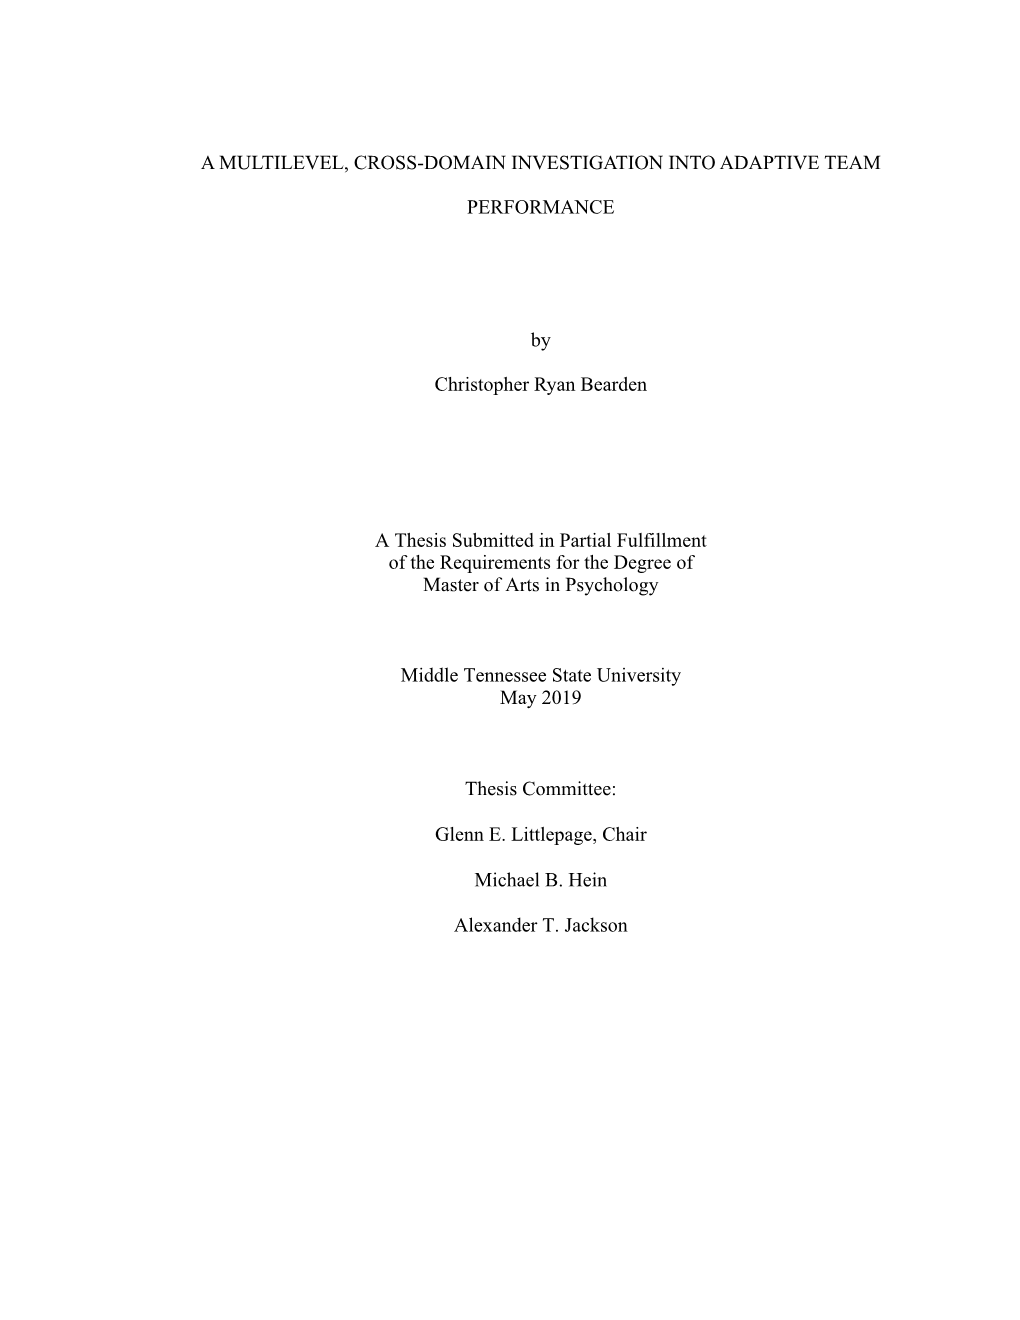 A MULTILEVEL, CROSS-DOMAIN INVESTIGATION INTO ADAPTIVE TEAM PERFORMANCE by Christopher Ryan Bearden a Thesis Submitted in Partia